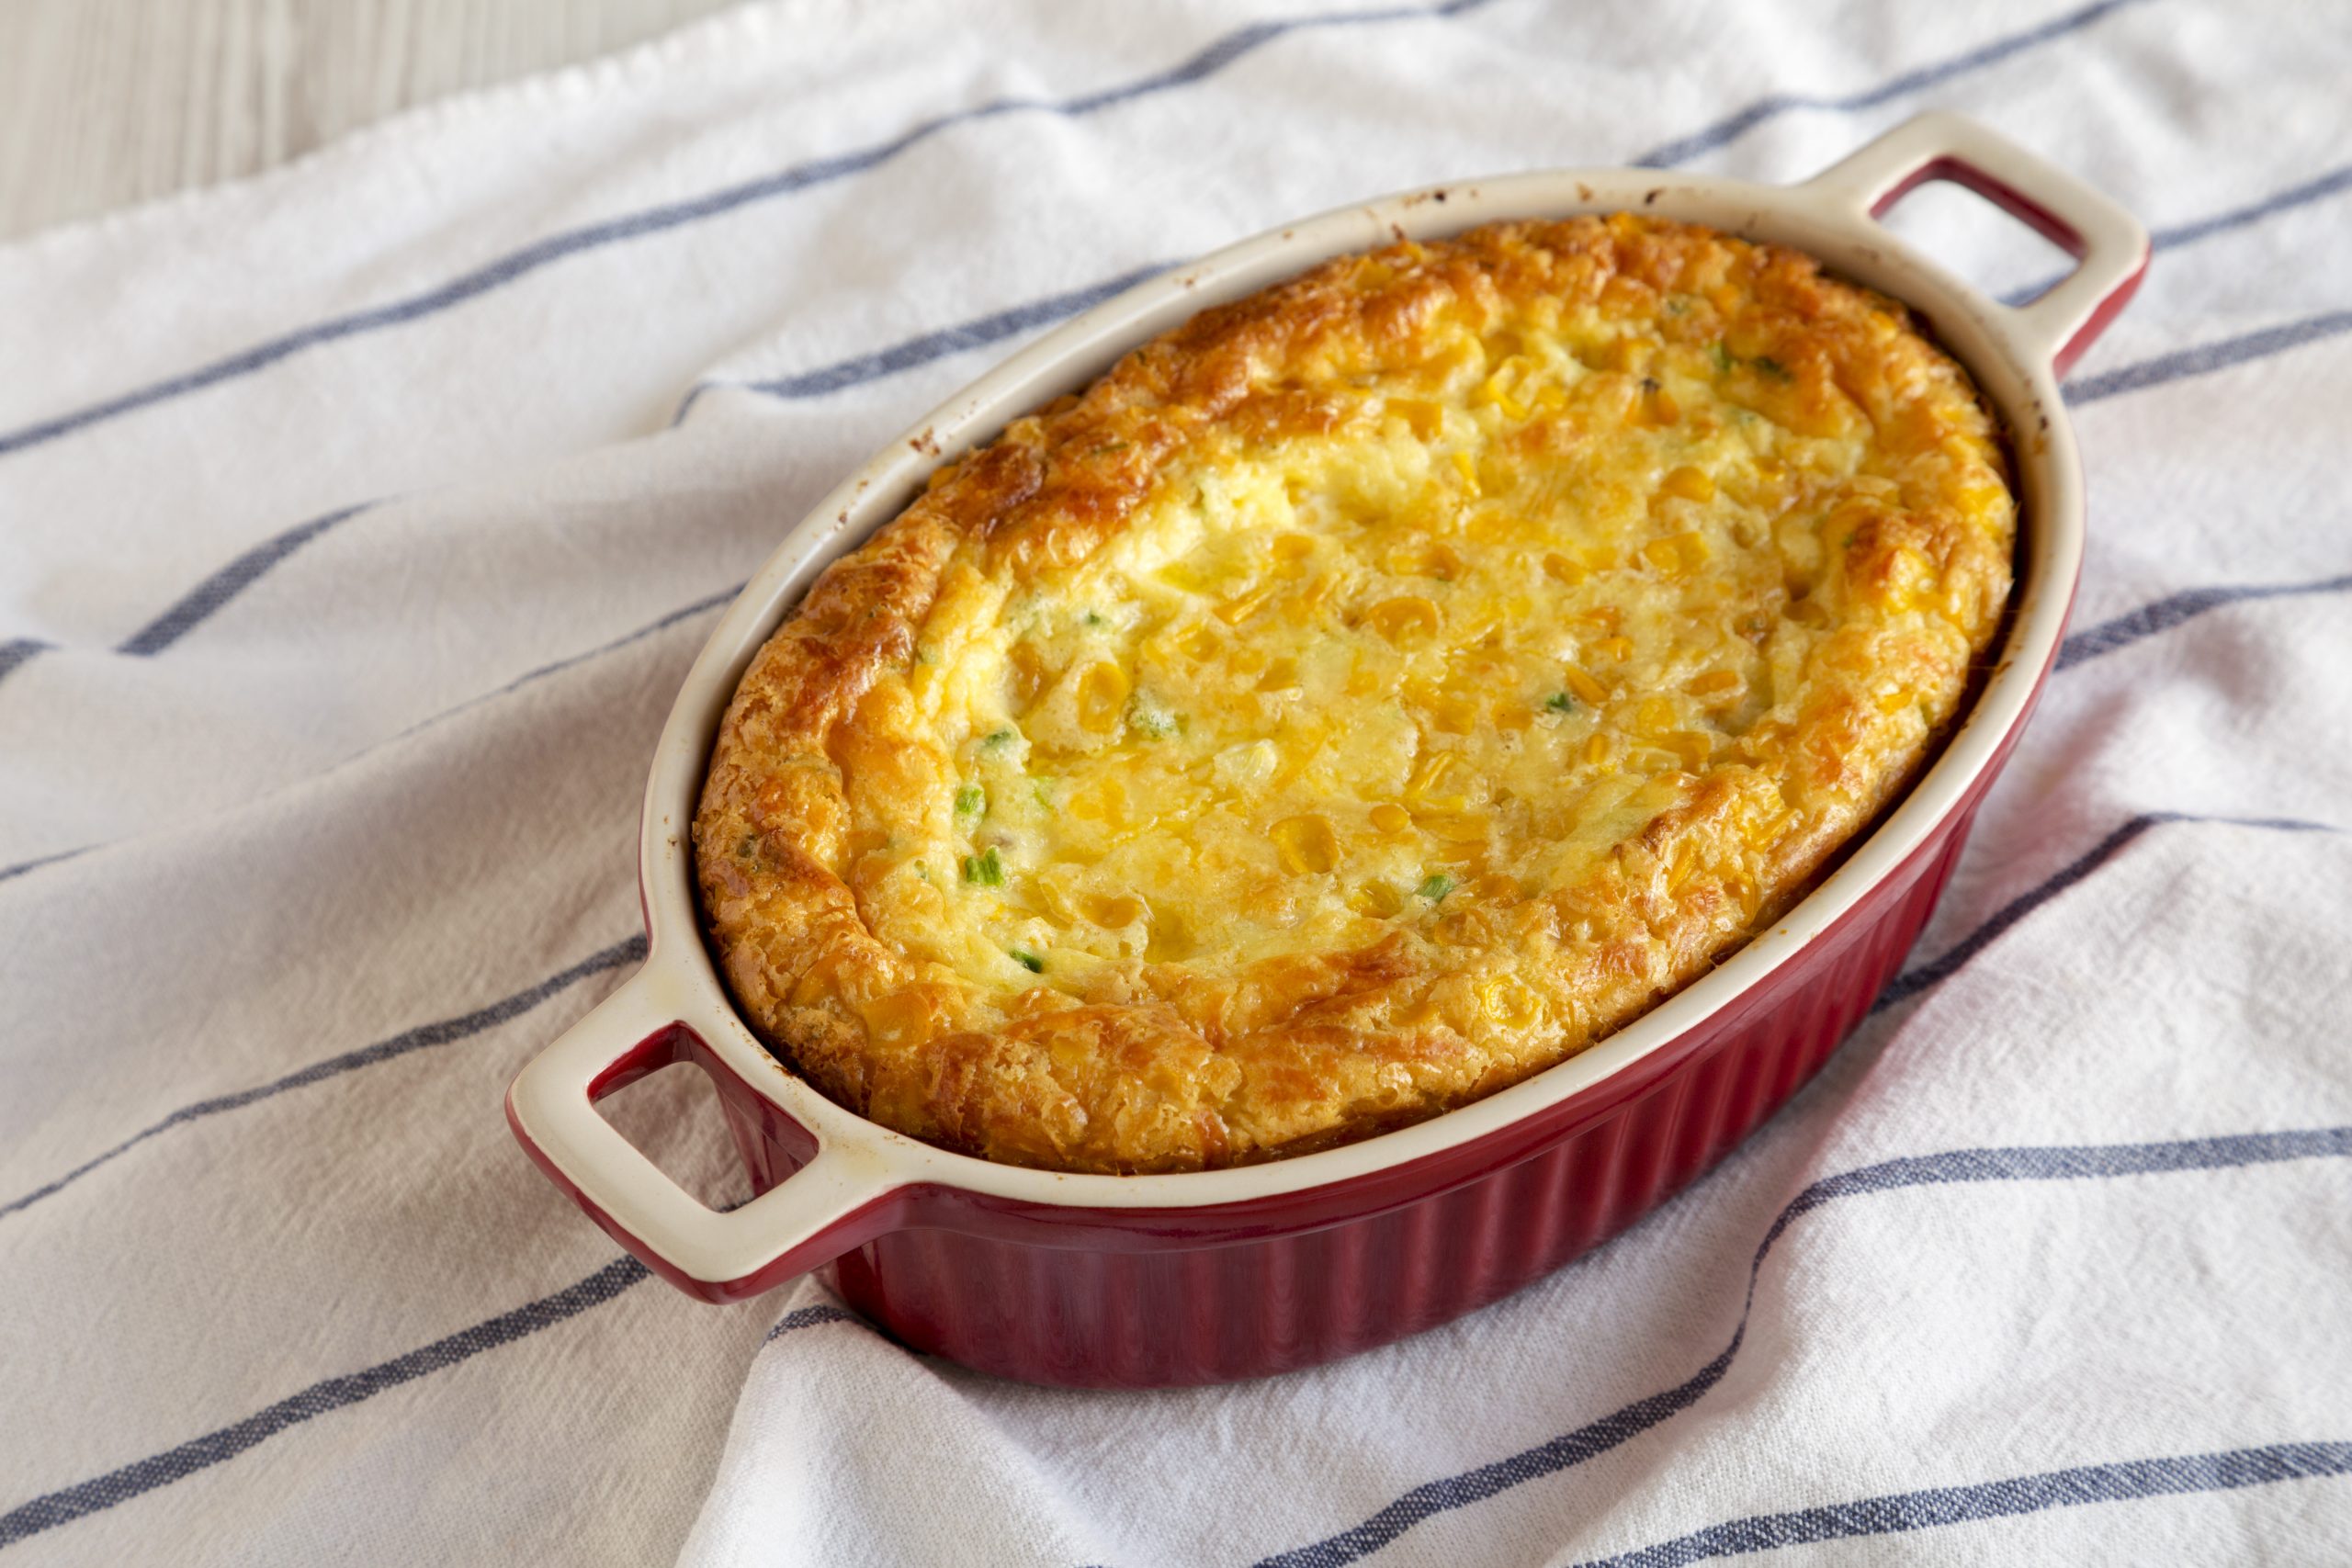 Kim Lyon’s Best of Show Canned Sweet Corn and Corn Casserole photo